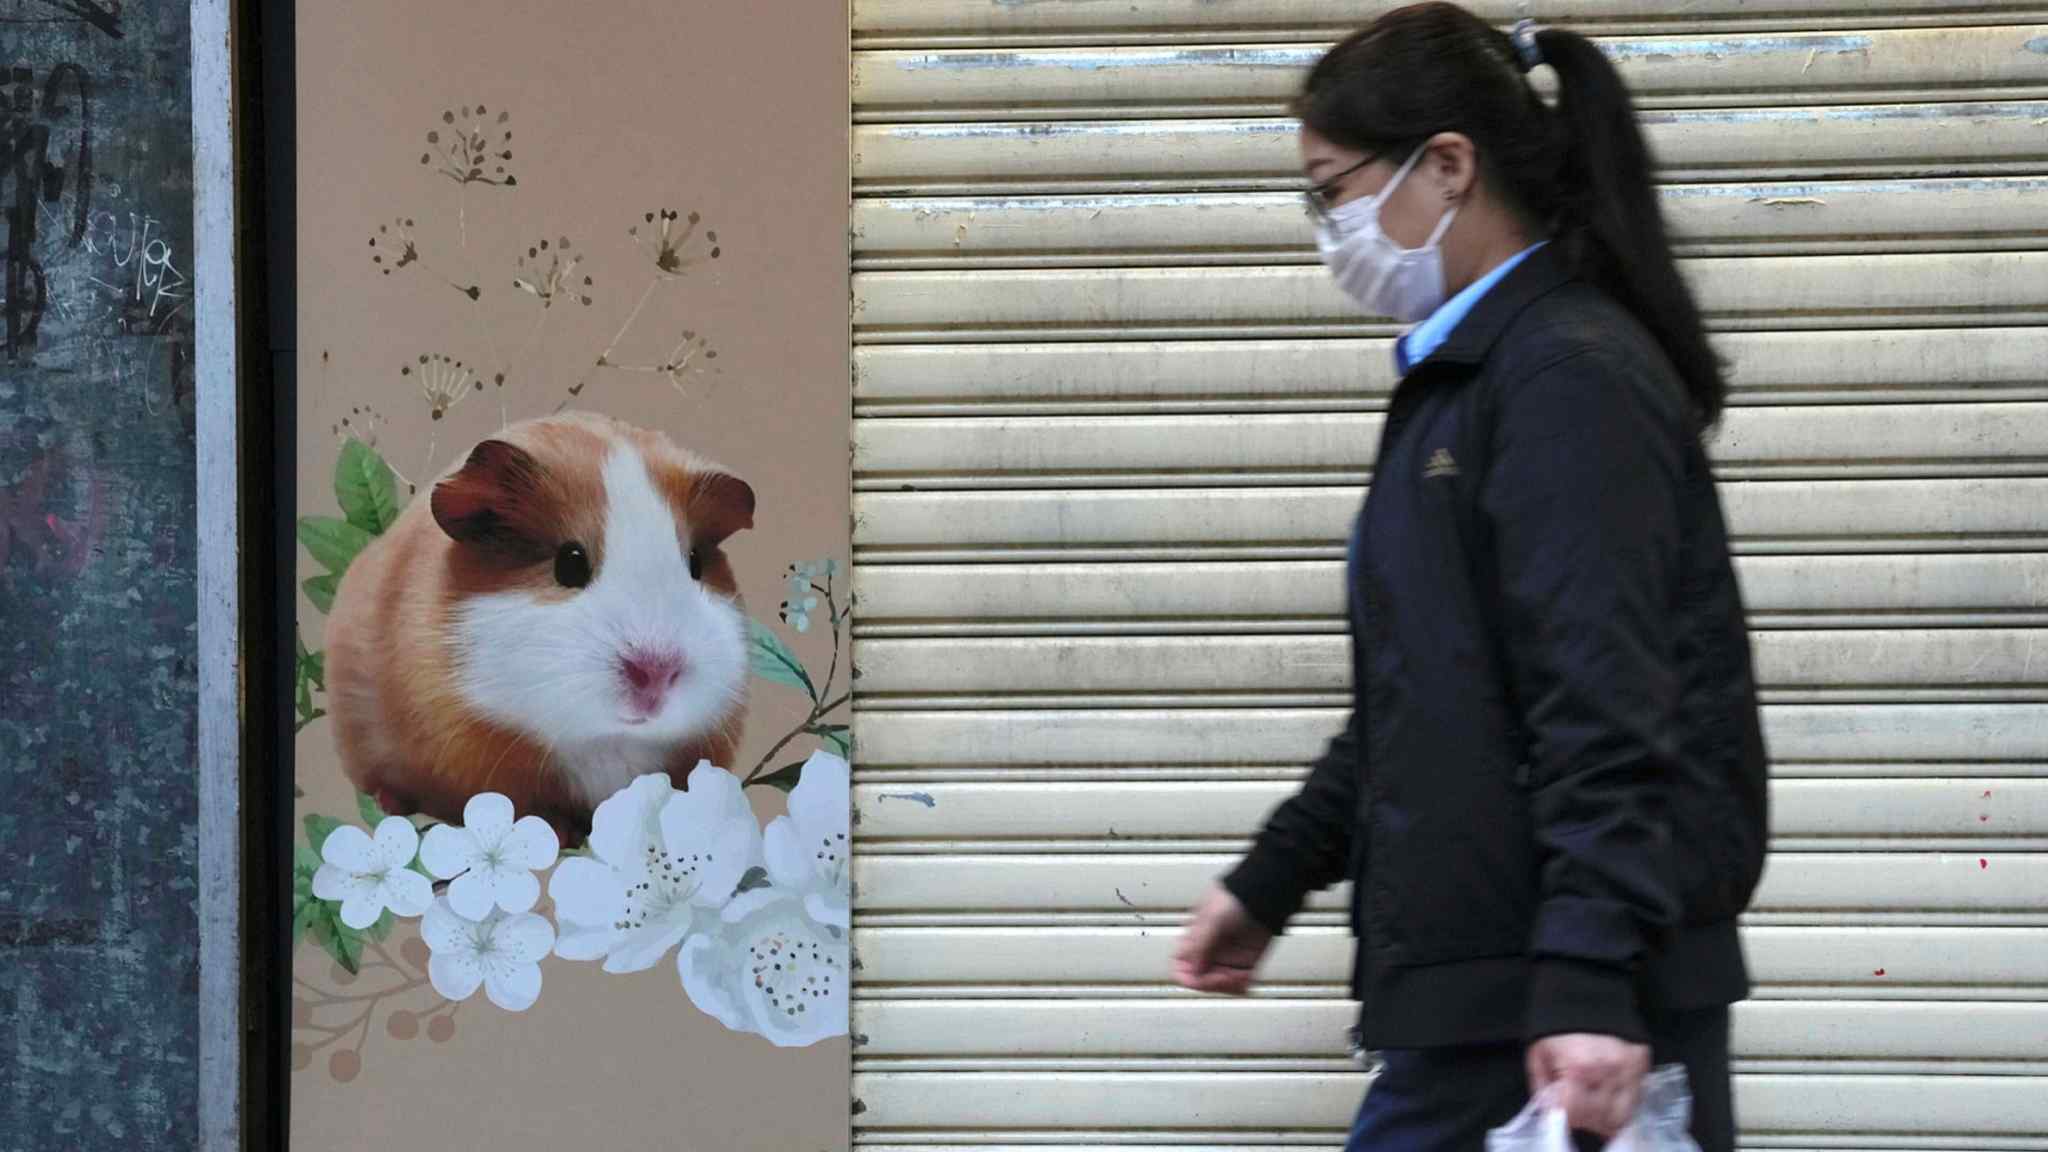 Hong Kong to cull hamsters and quarantine pet store visitors over Covid fears